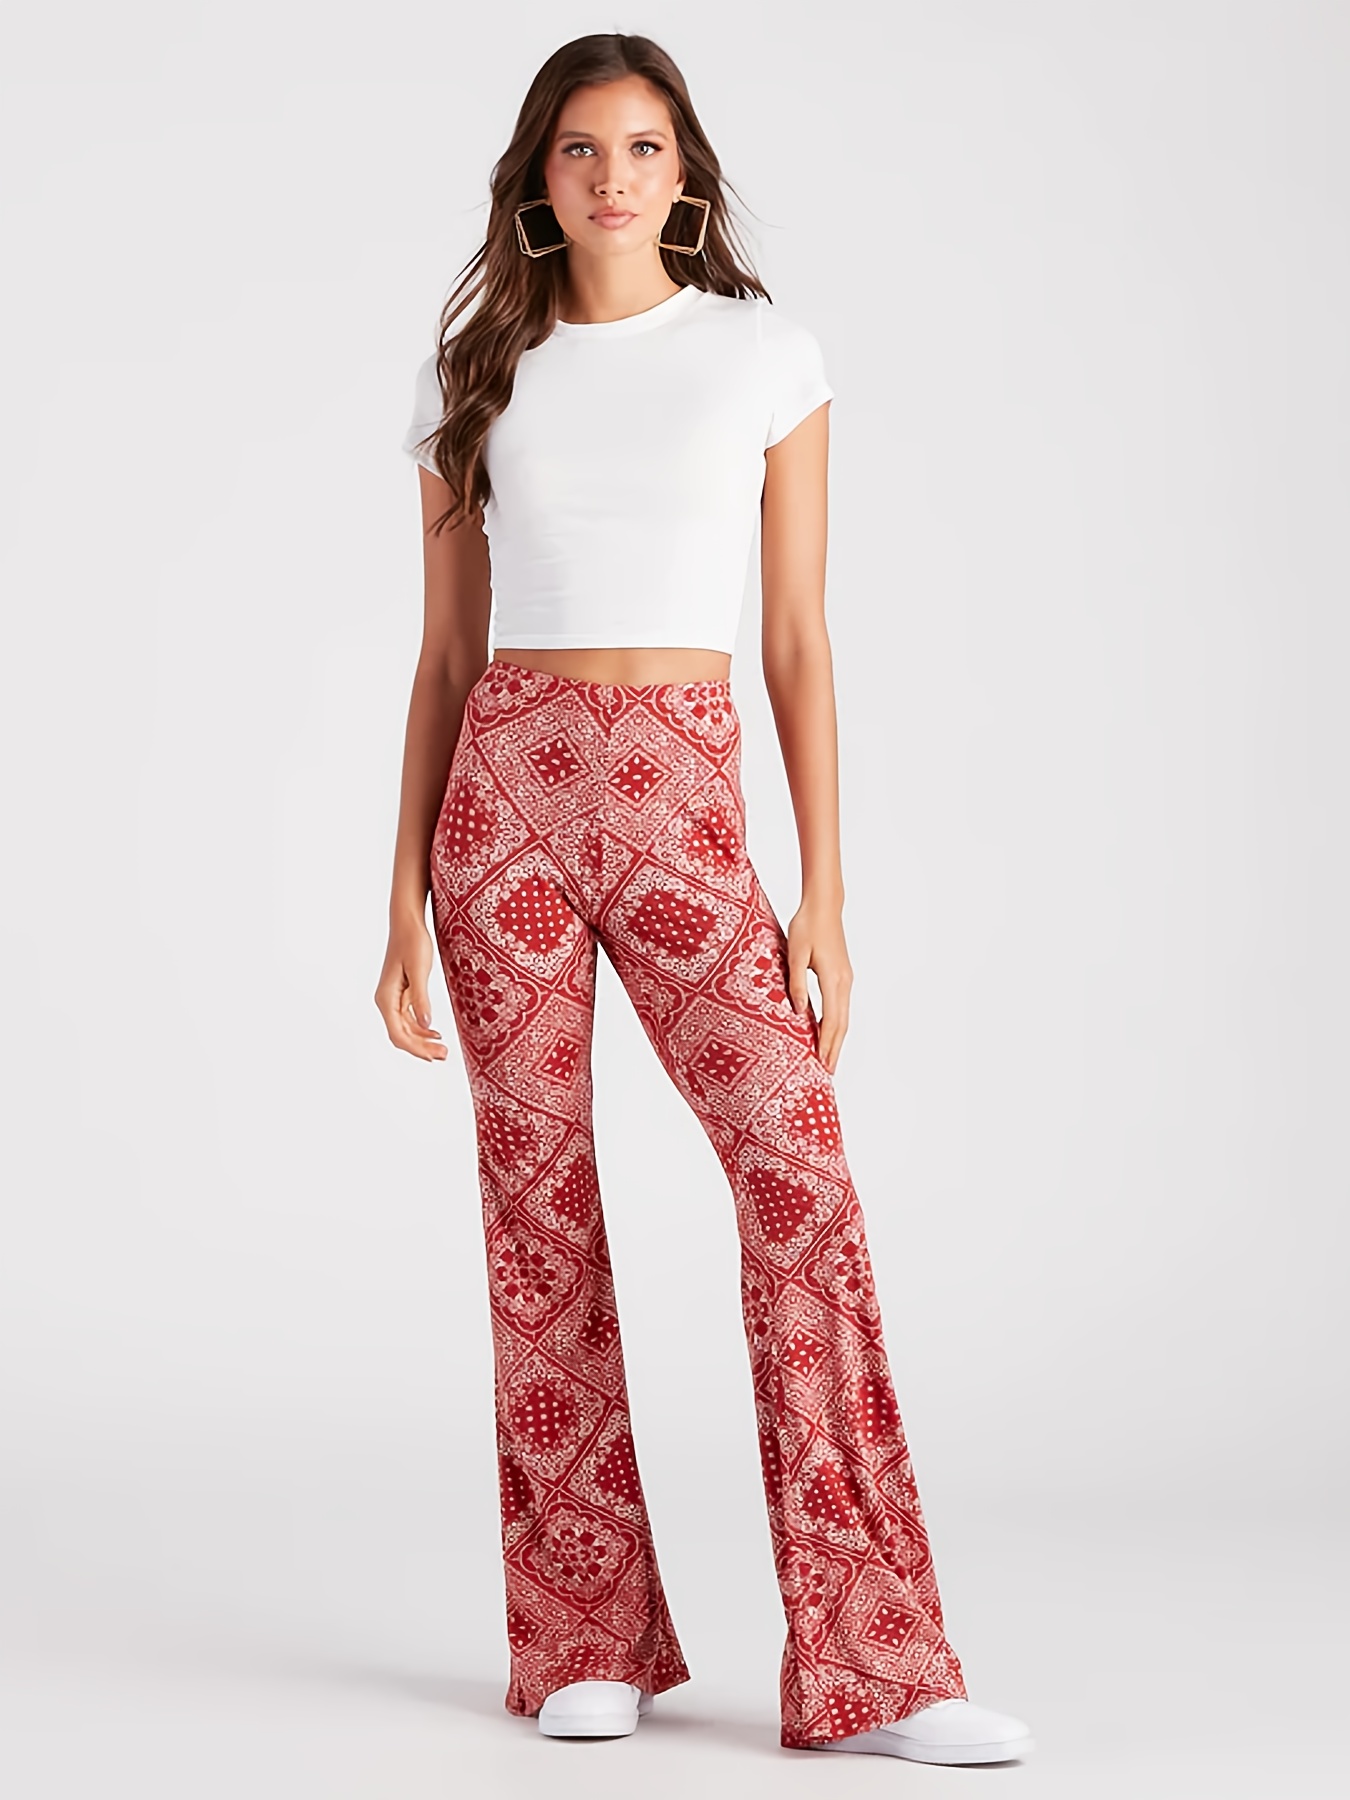 Tropical Print Flare Pants – Just 4 You Fashions